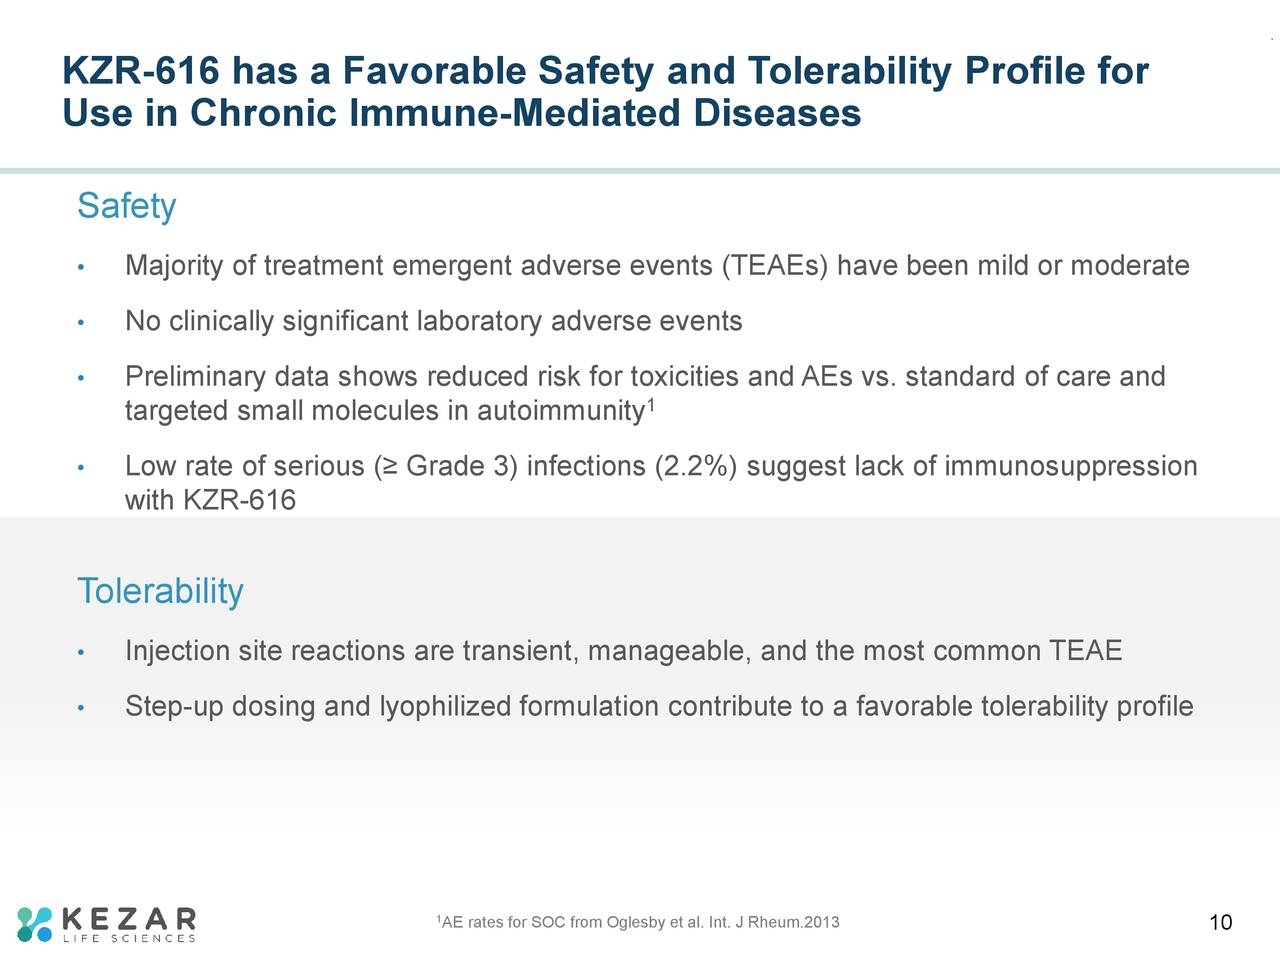 KZR-616 has a Favorable Safety and Tolerability Profile for